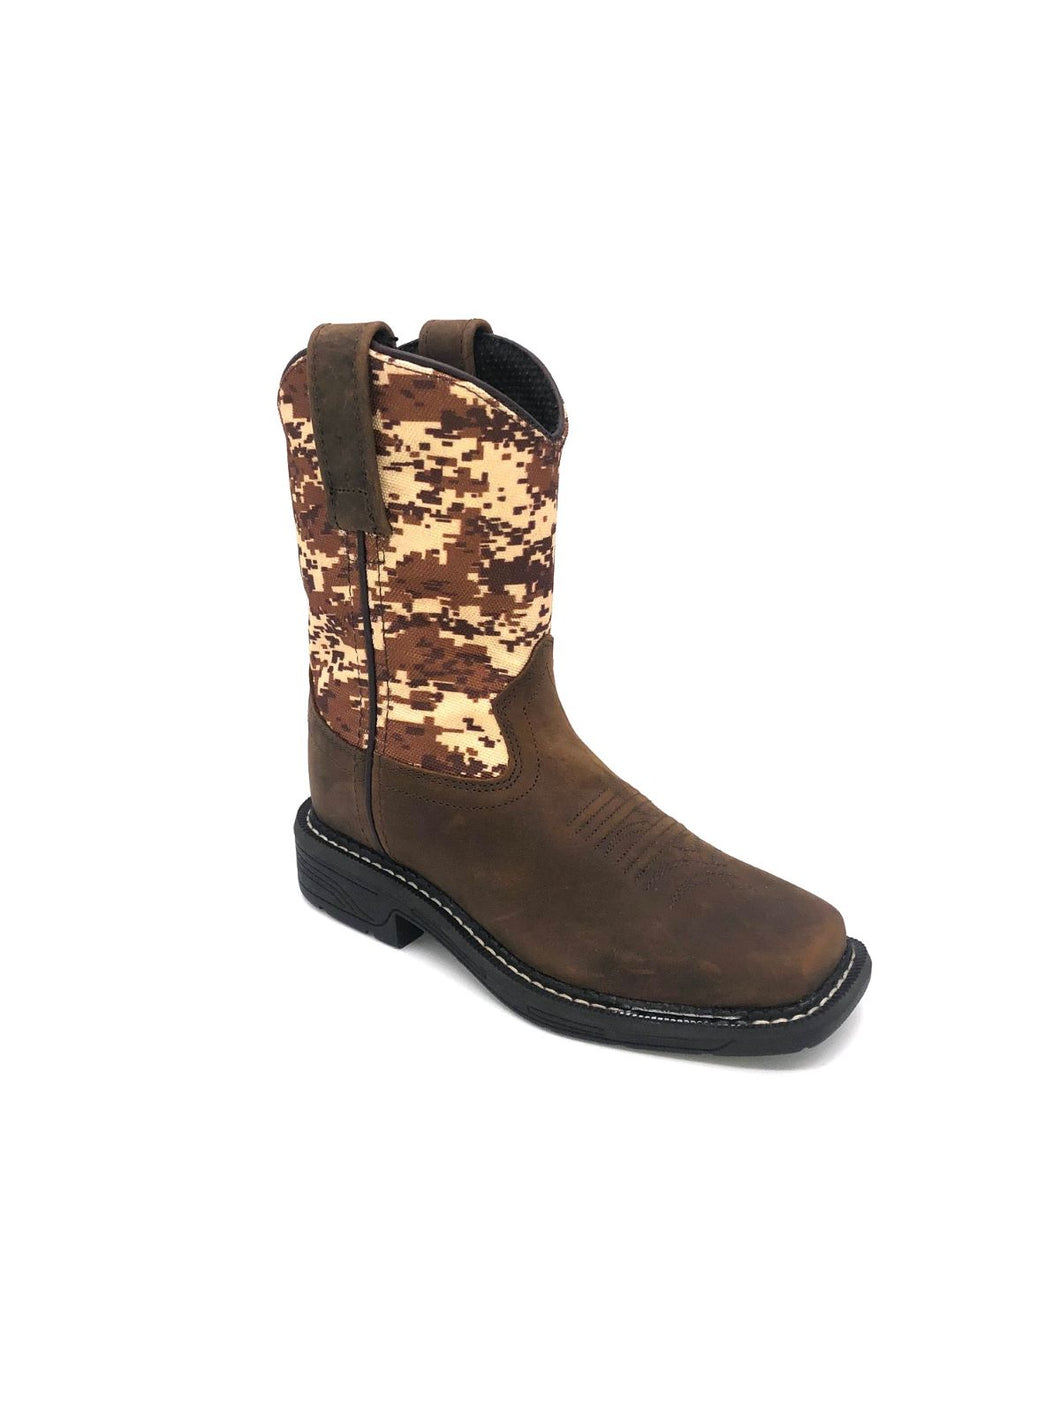 'Old West' Youth Western Square Toe - Digital Camo